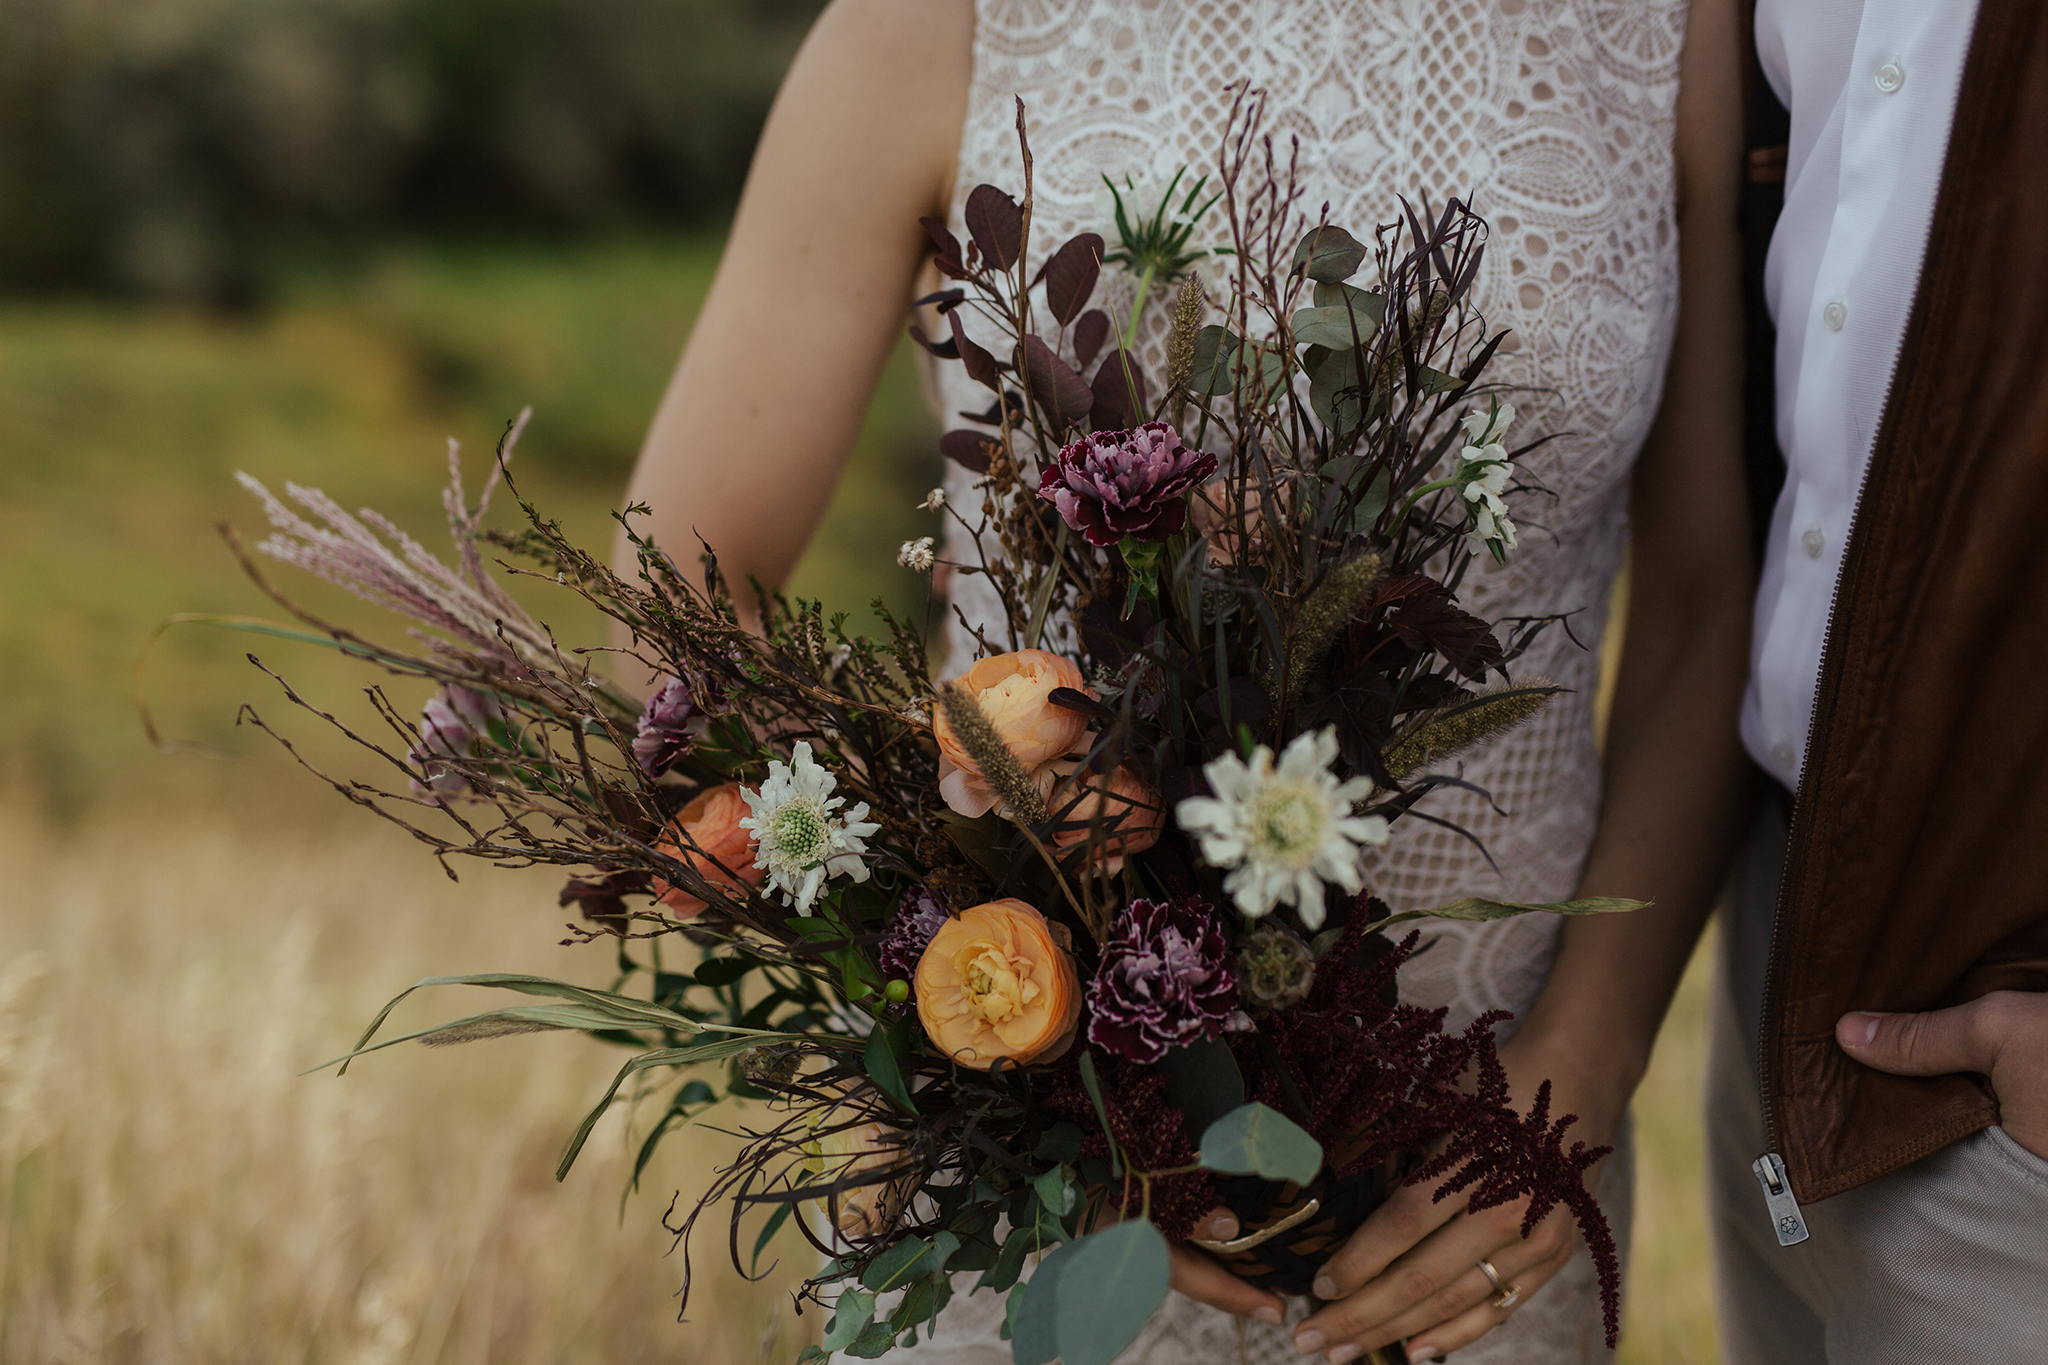 Becca and Reid's Countryside Vow Renewal// Styled Inspiration outside of Calgary, Alberta - Bronte Bride